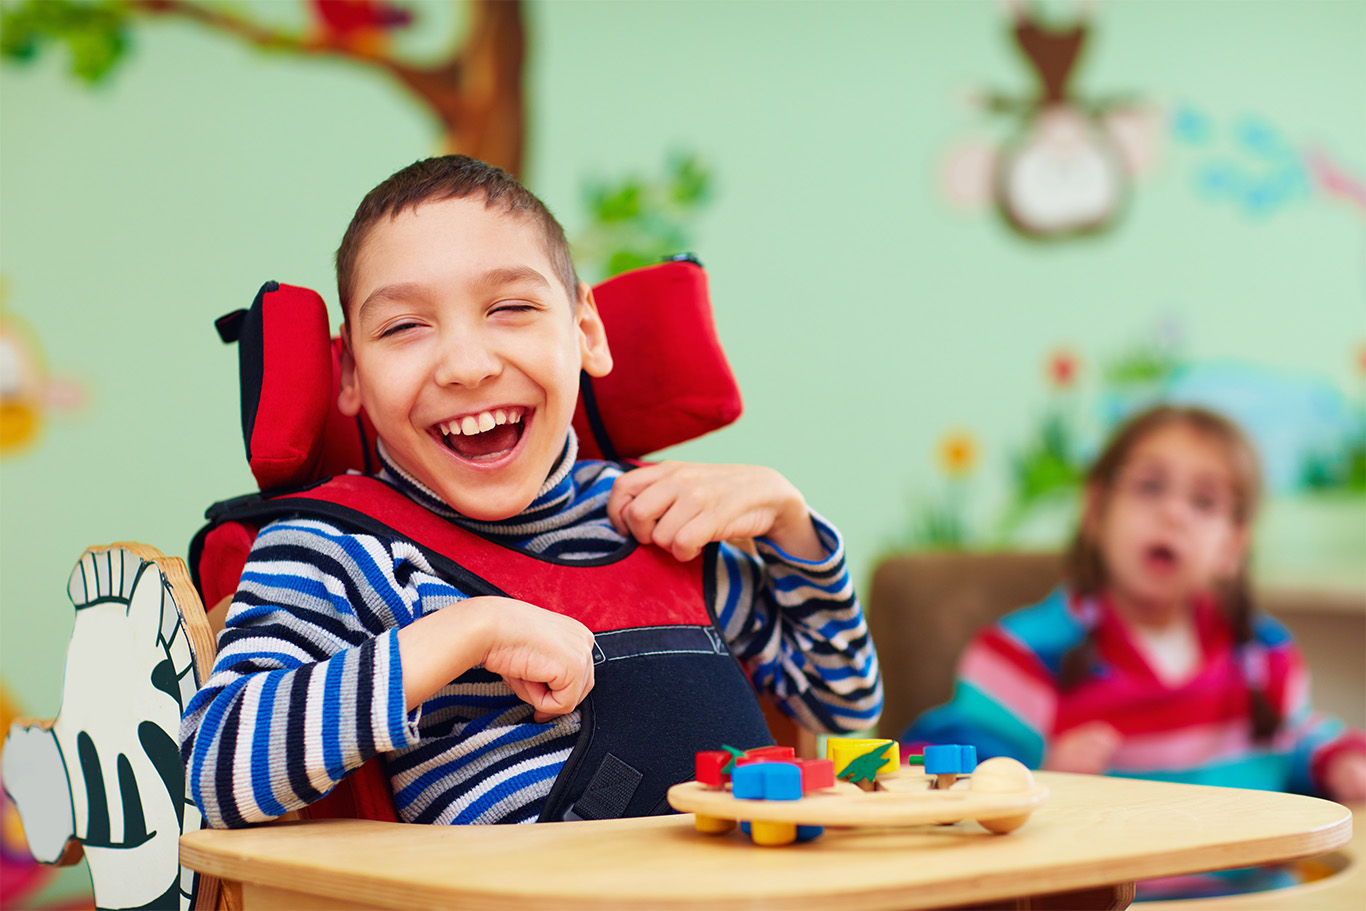 Paces support children living with cerebral palsy, MS, stroke, Parkinson’s and other motor disorders